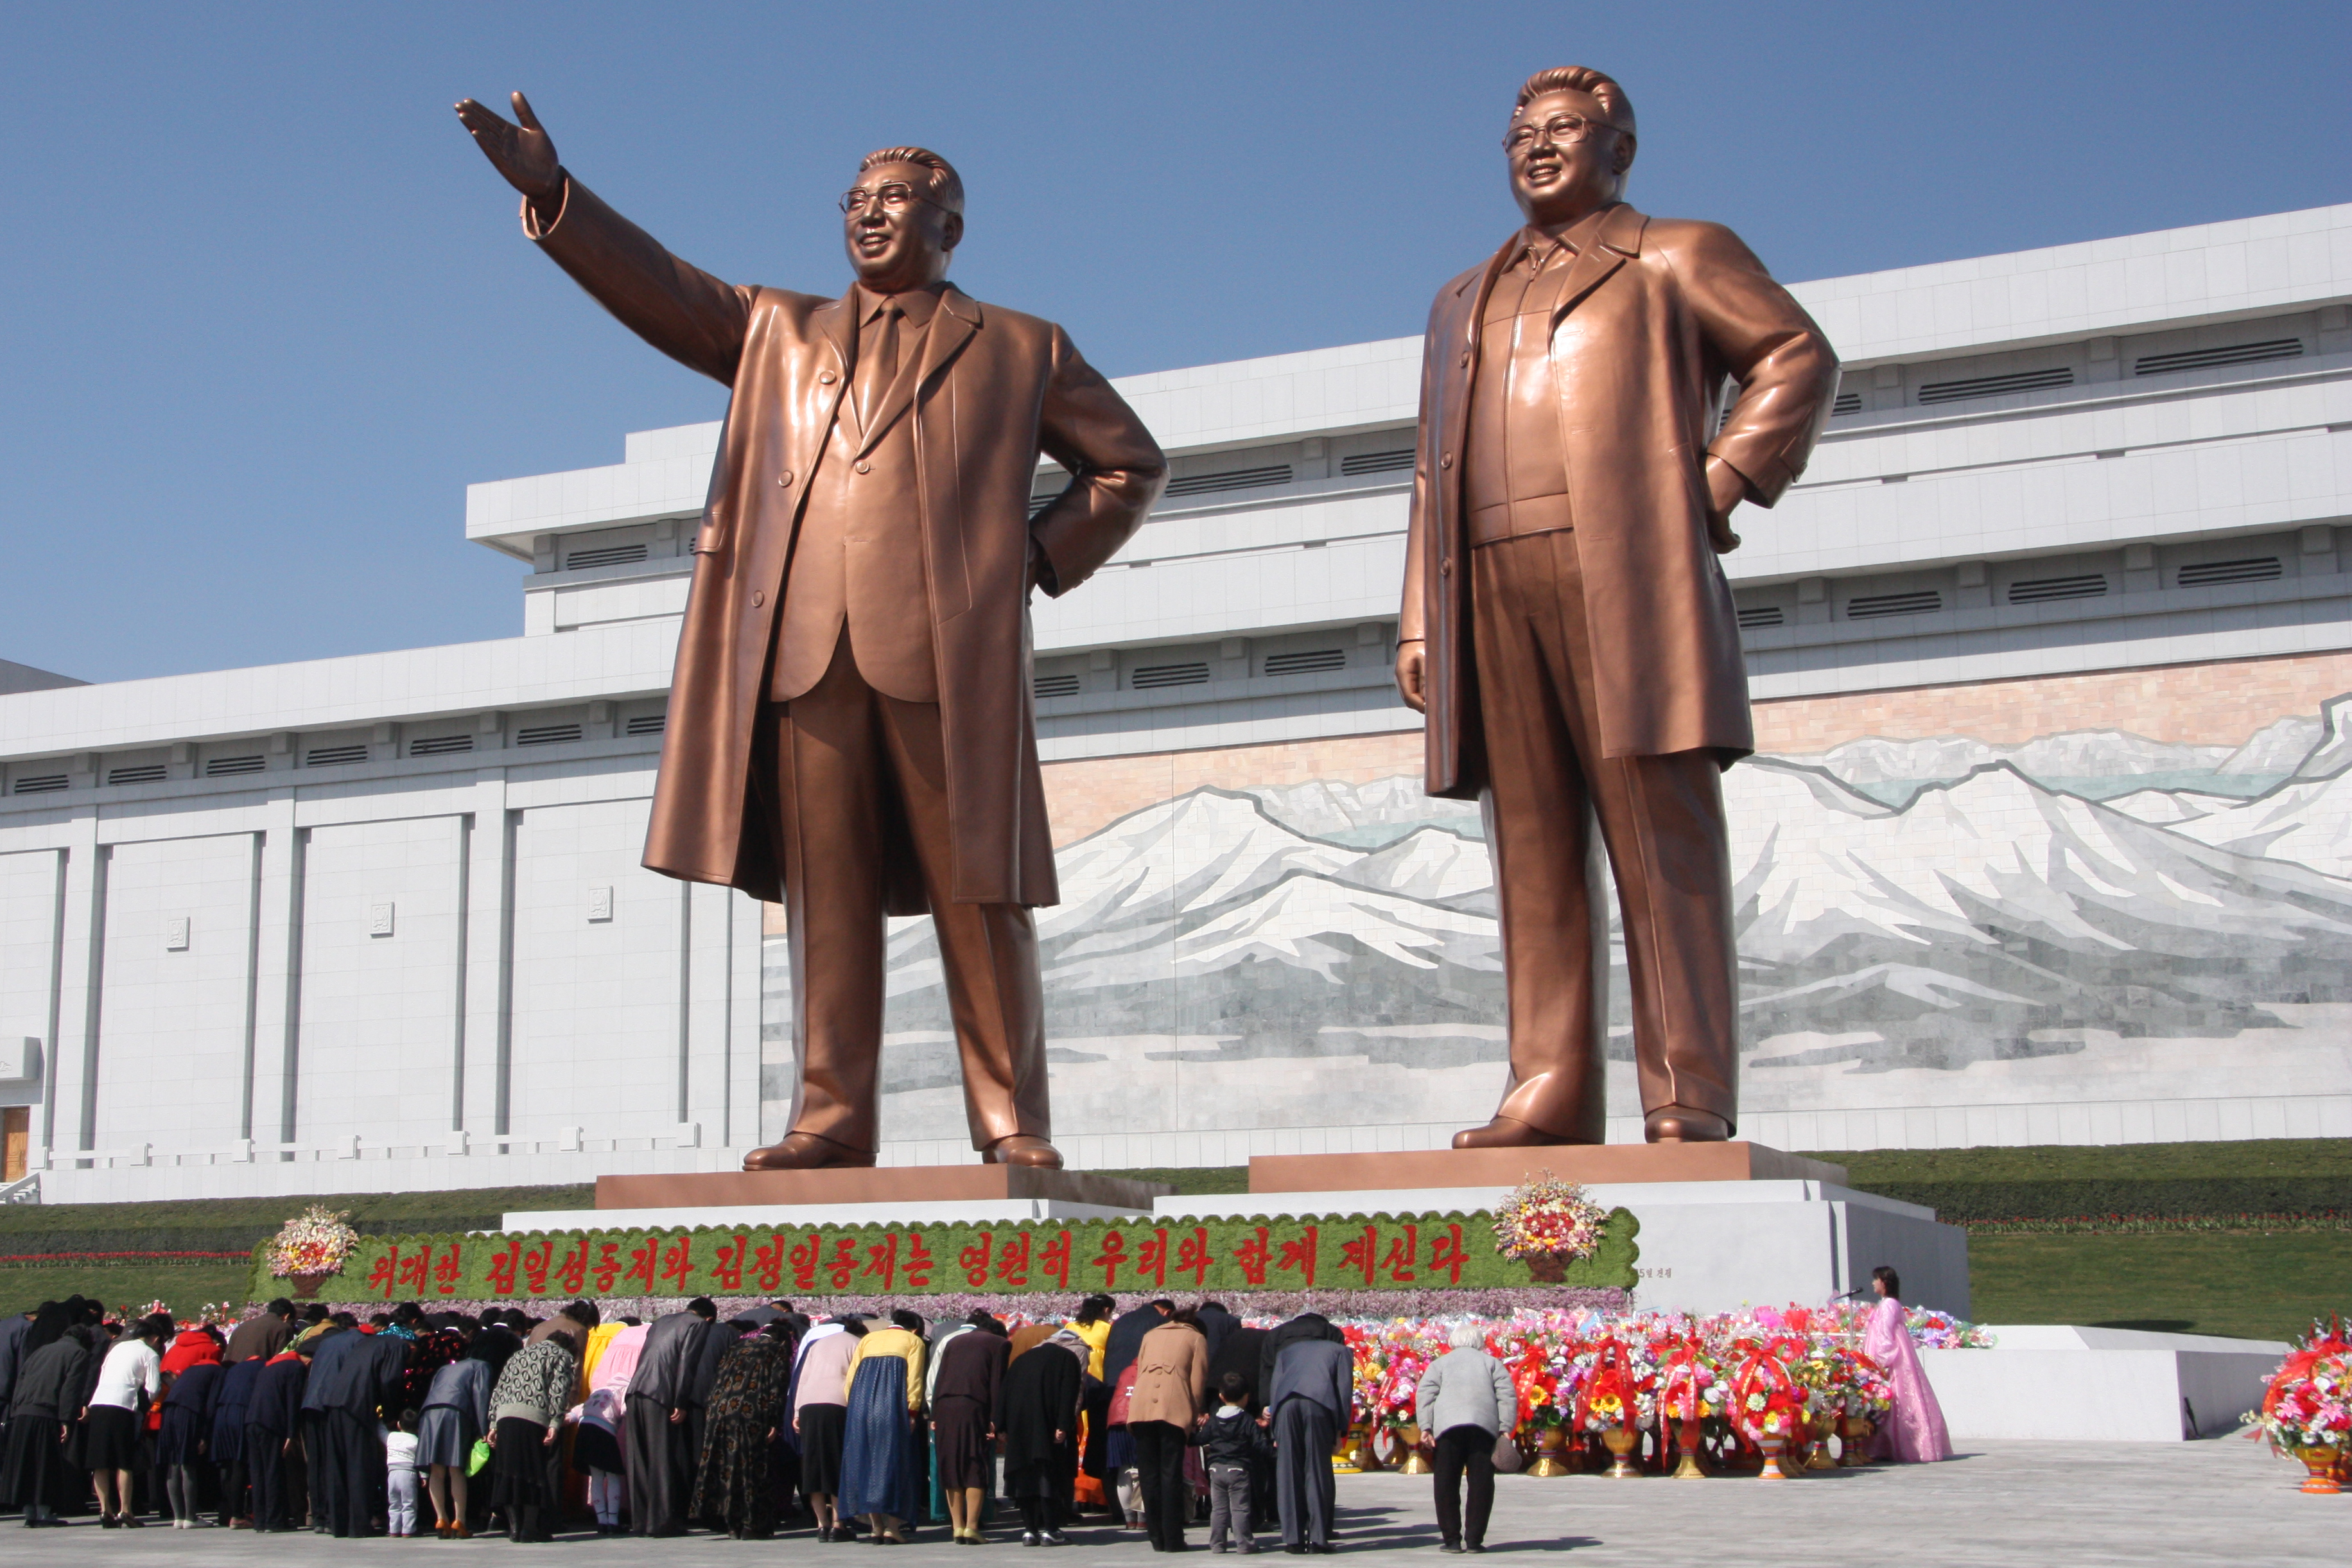 The_statues_of_Kim_Il_Sung_and_Kim_Jong_Il_on_Mansu_Hill_in_Pyongyang_(april_2012).jpg